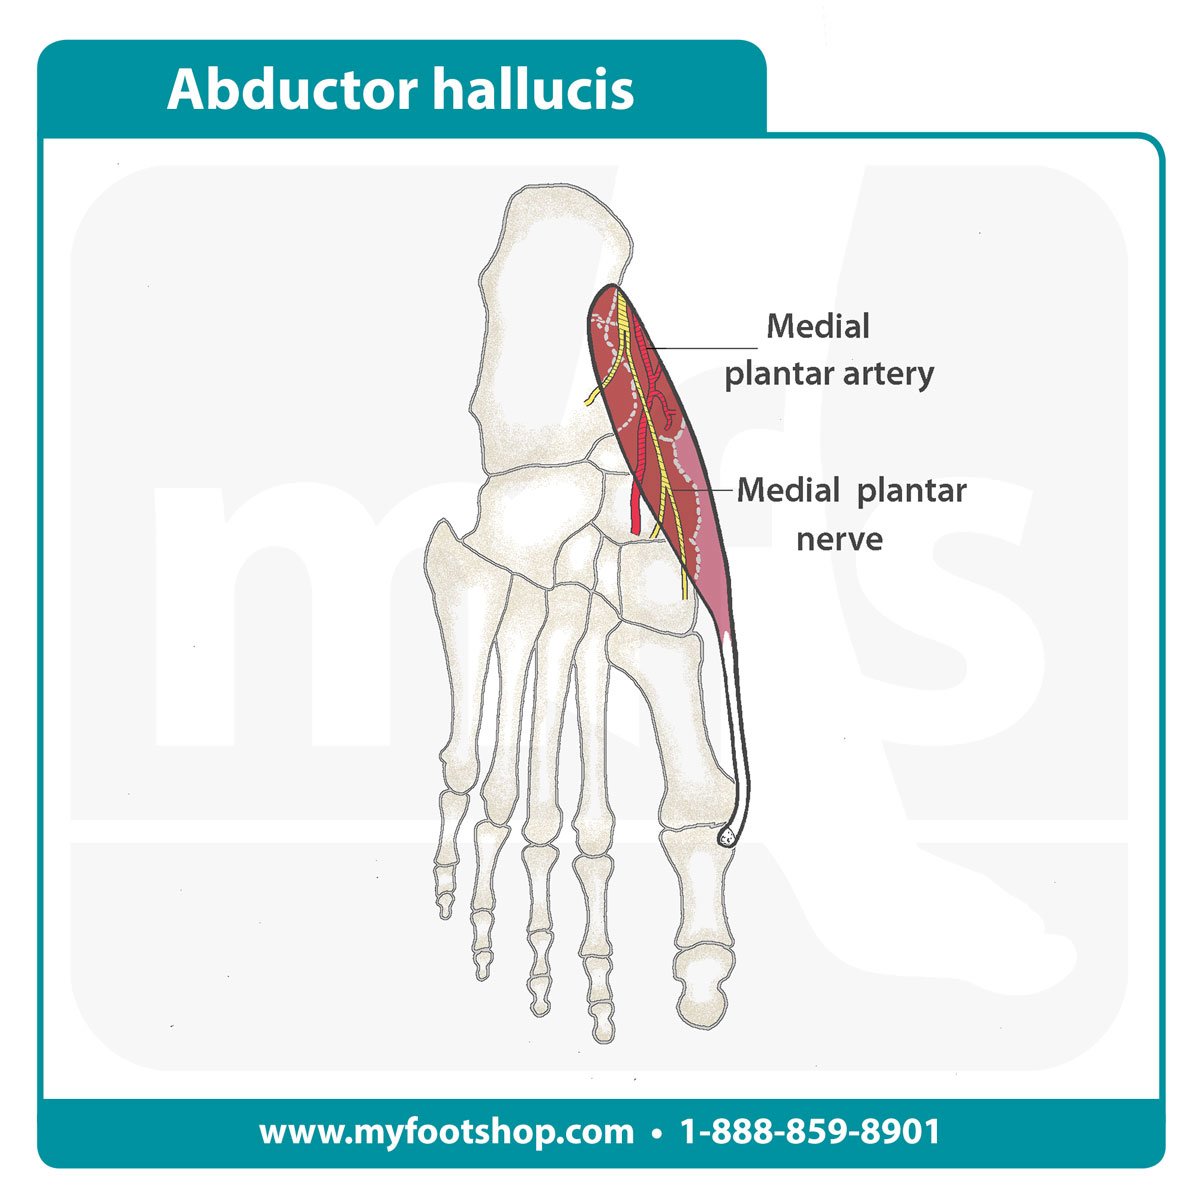 image of the abductor hallucis muscle of the foot